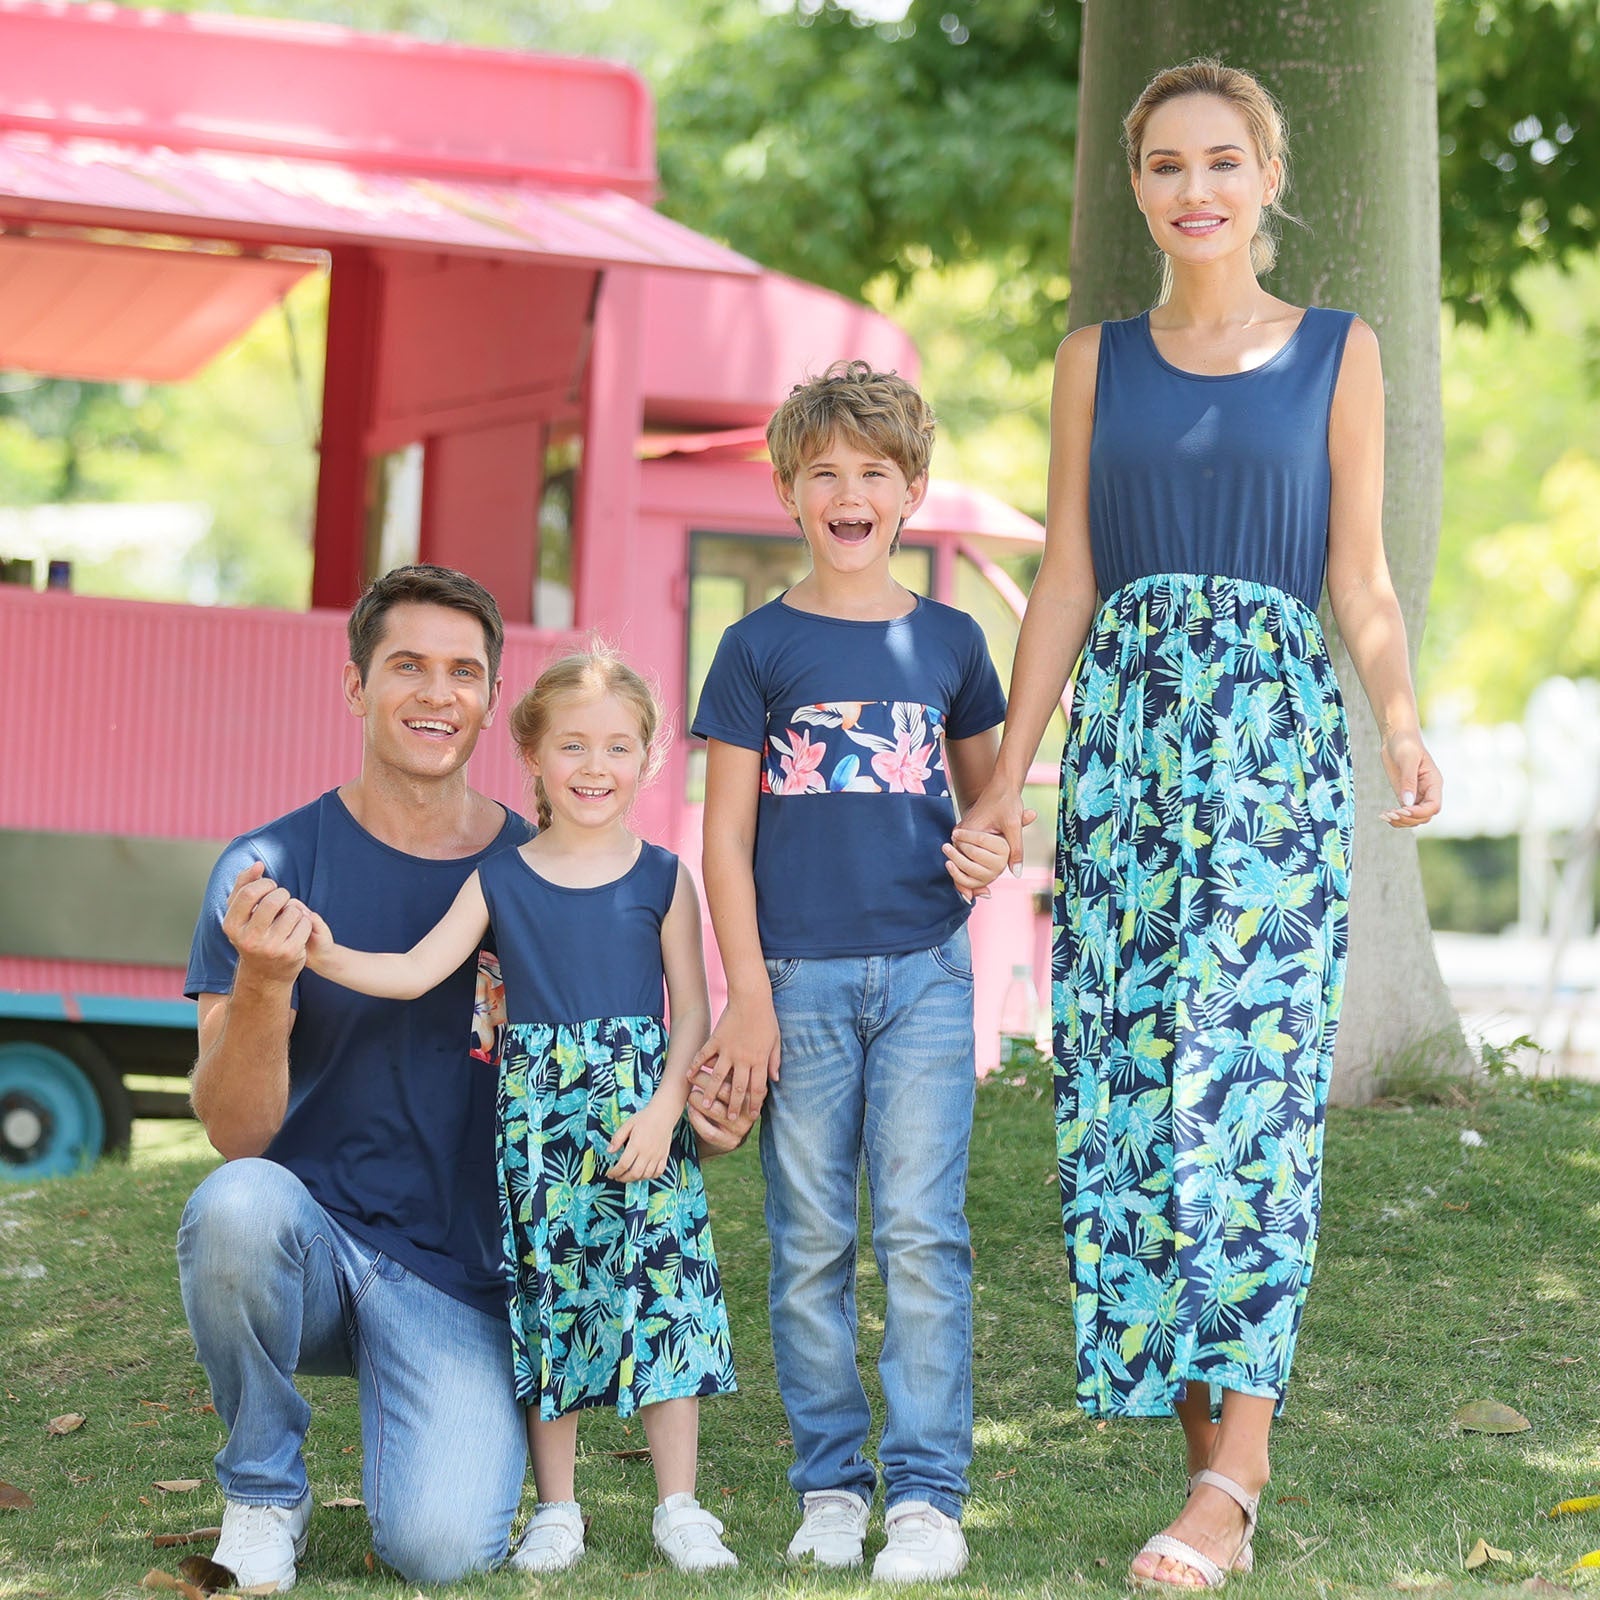 Family Matching Floral Print Dresses & T-shirts Sets